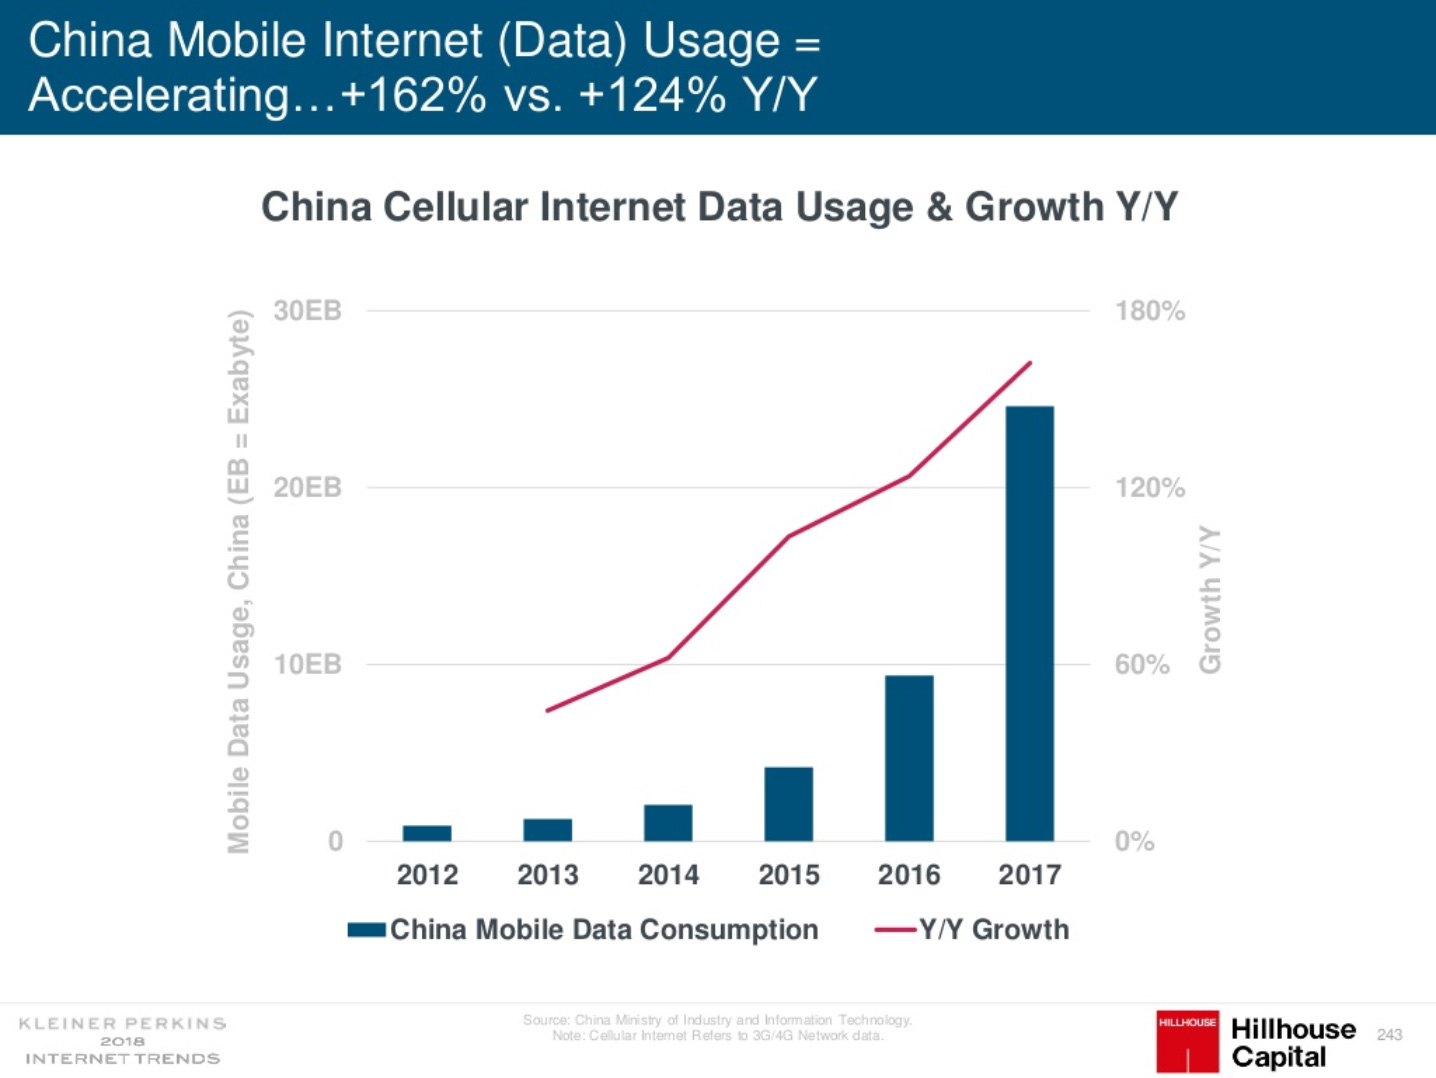 Internet Data Usage Growth in China